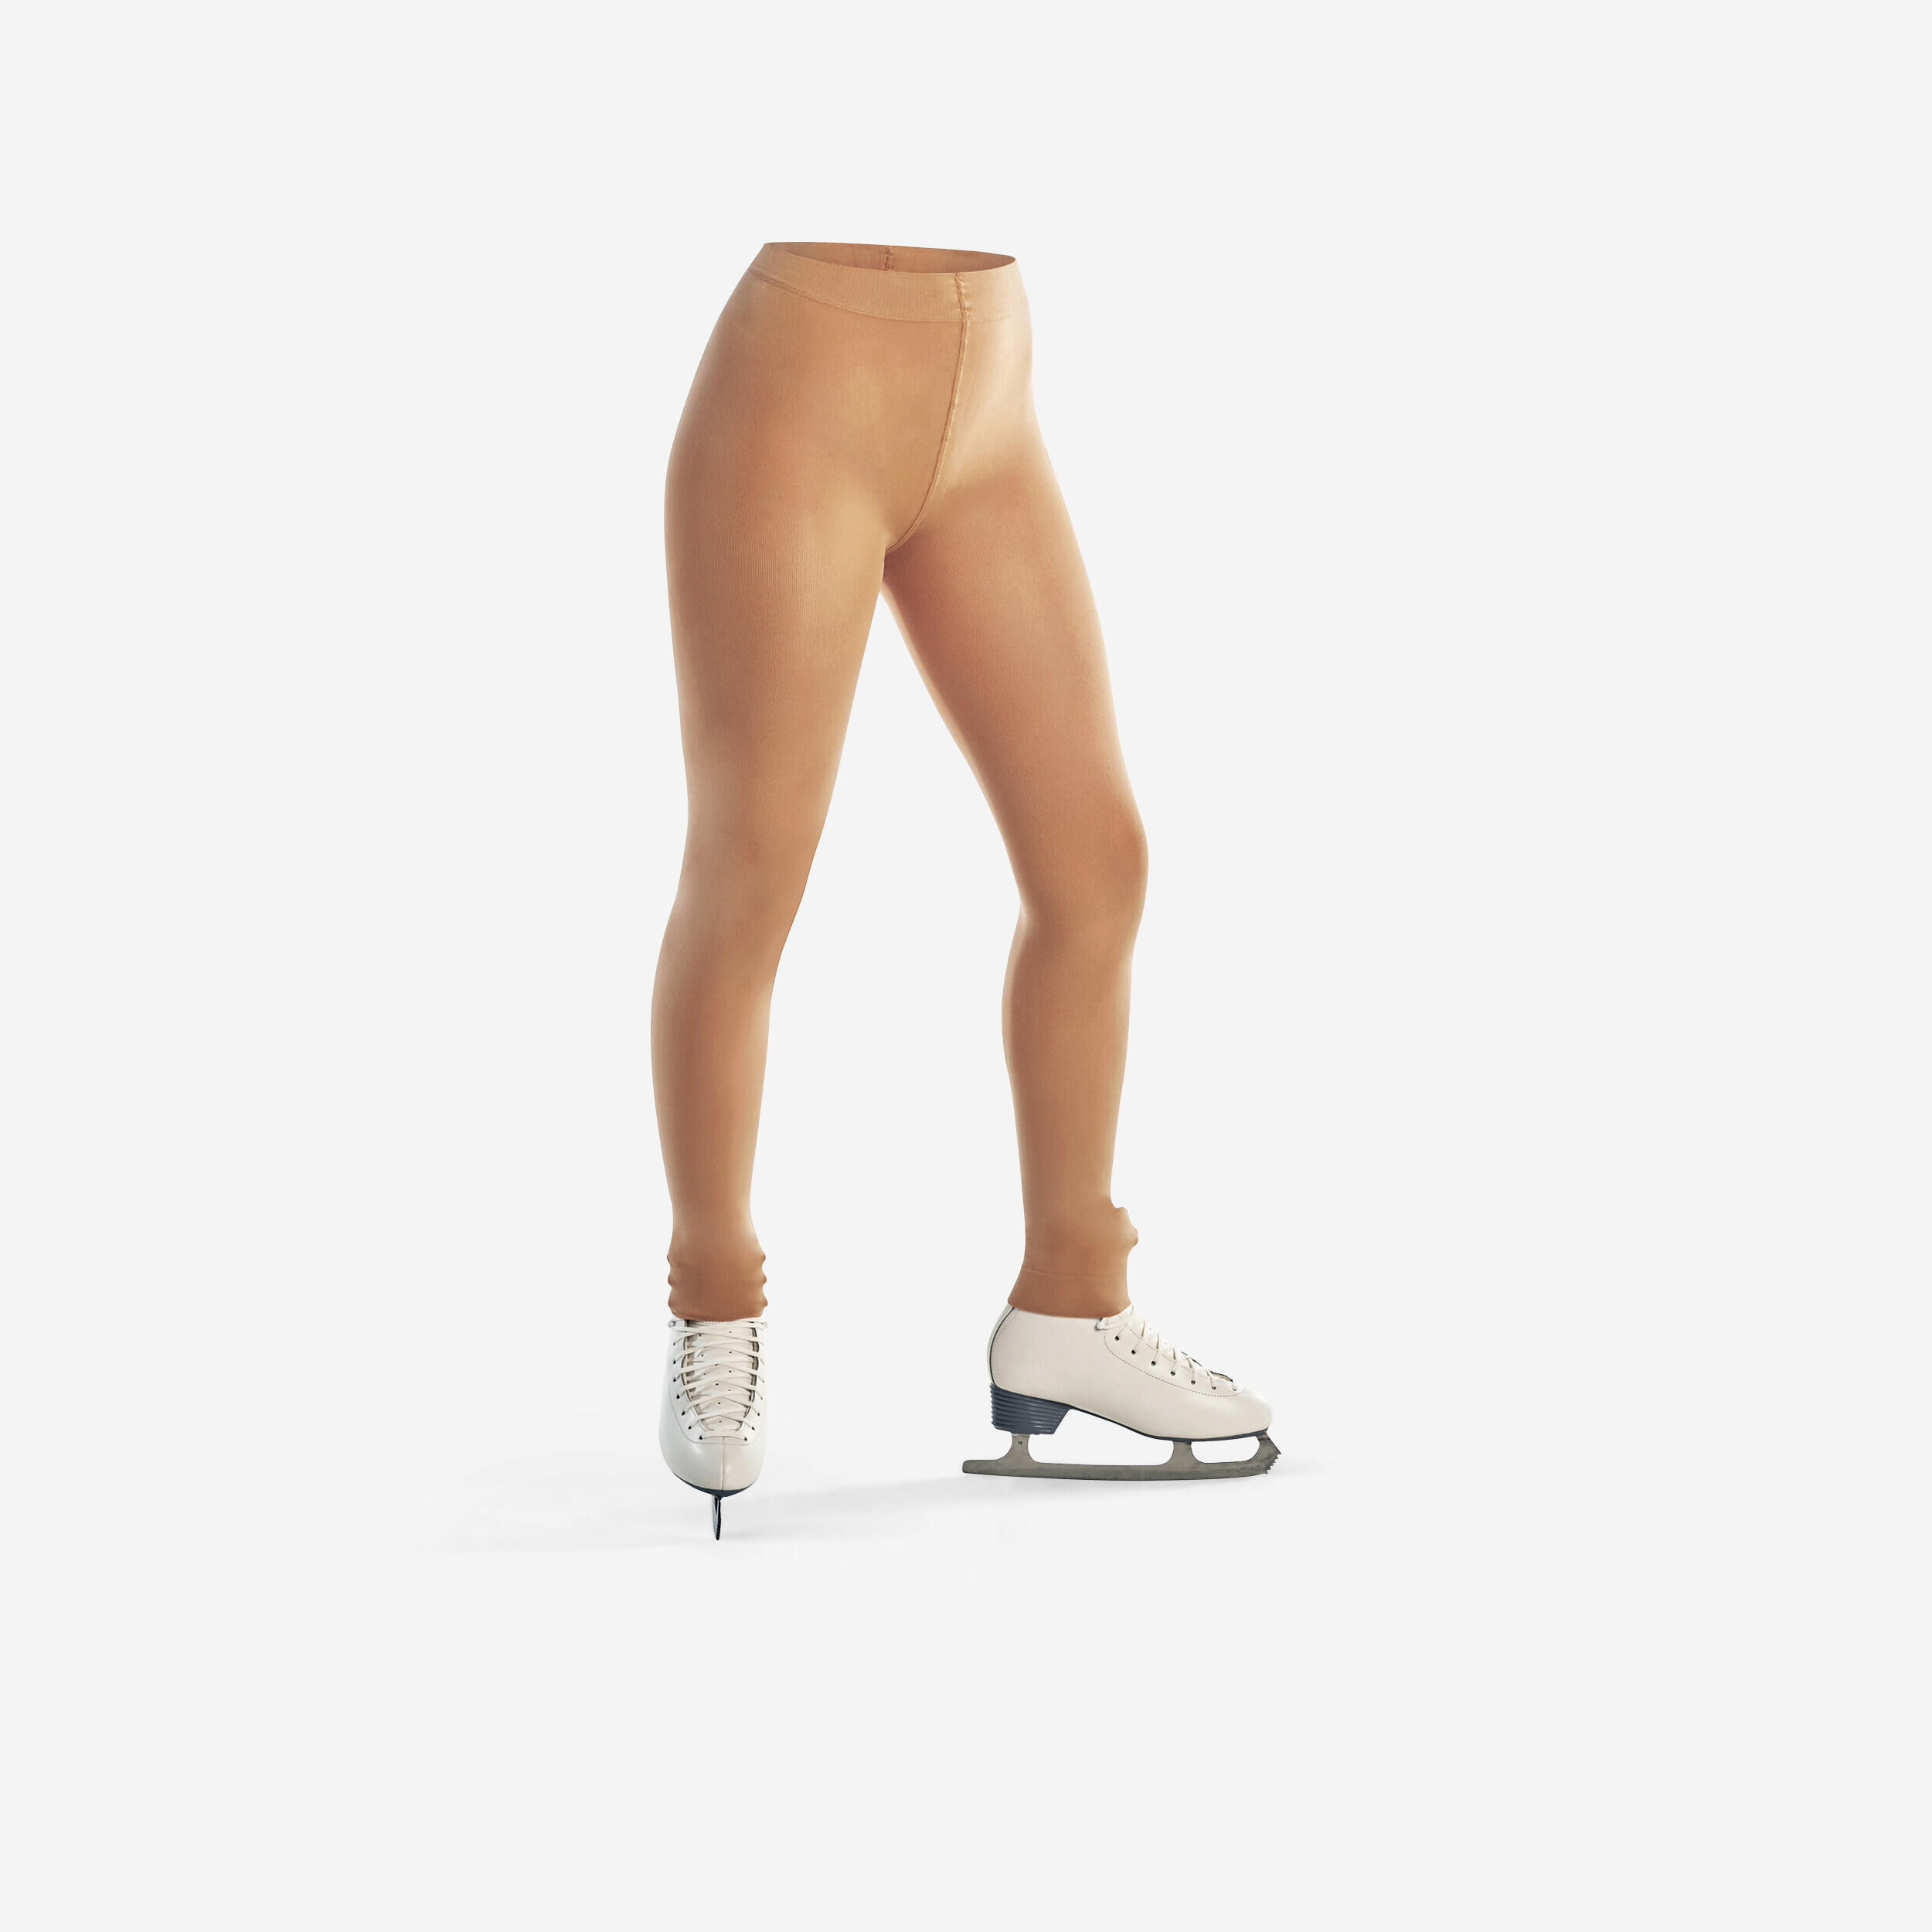 AXELYS Adult Footless Figure Skating Tights